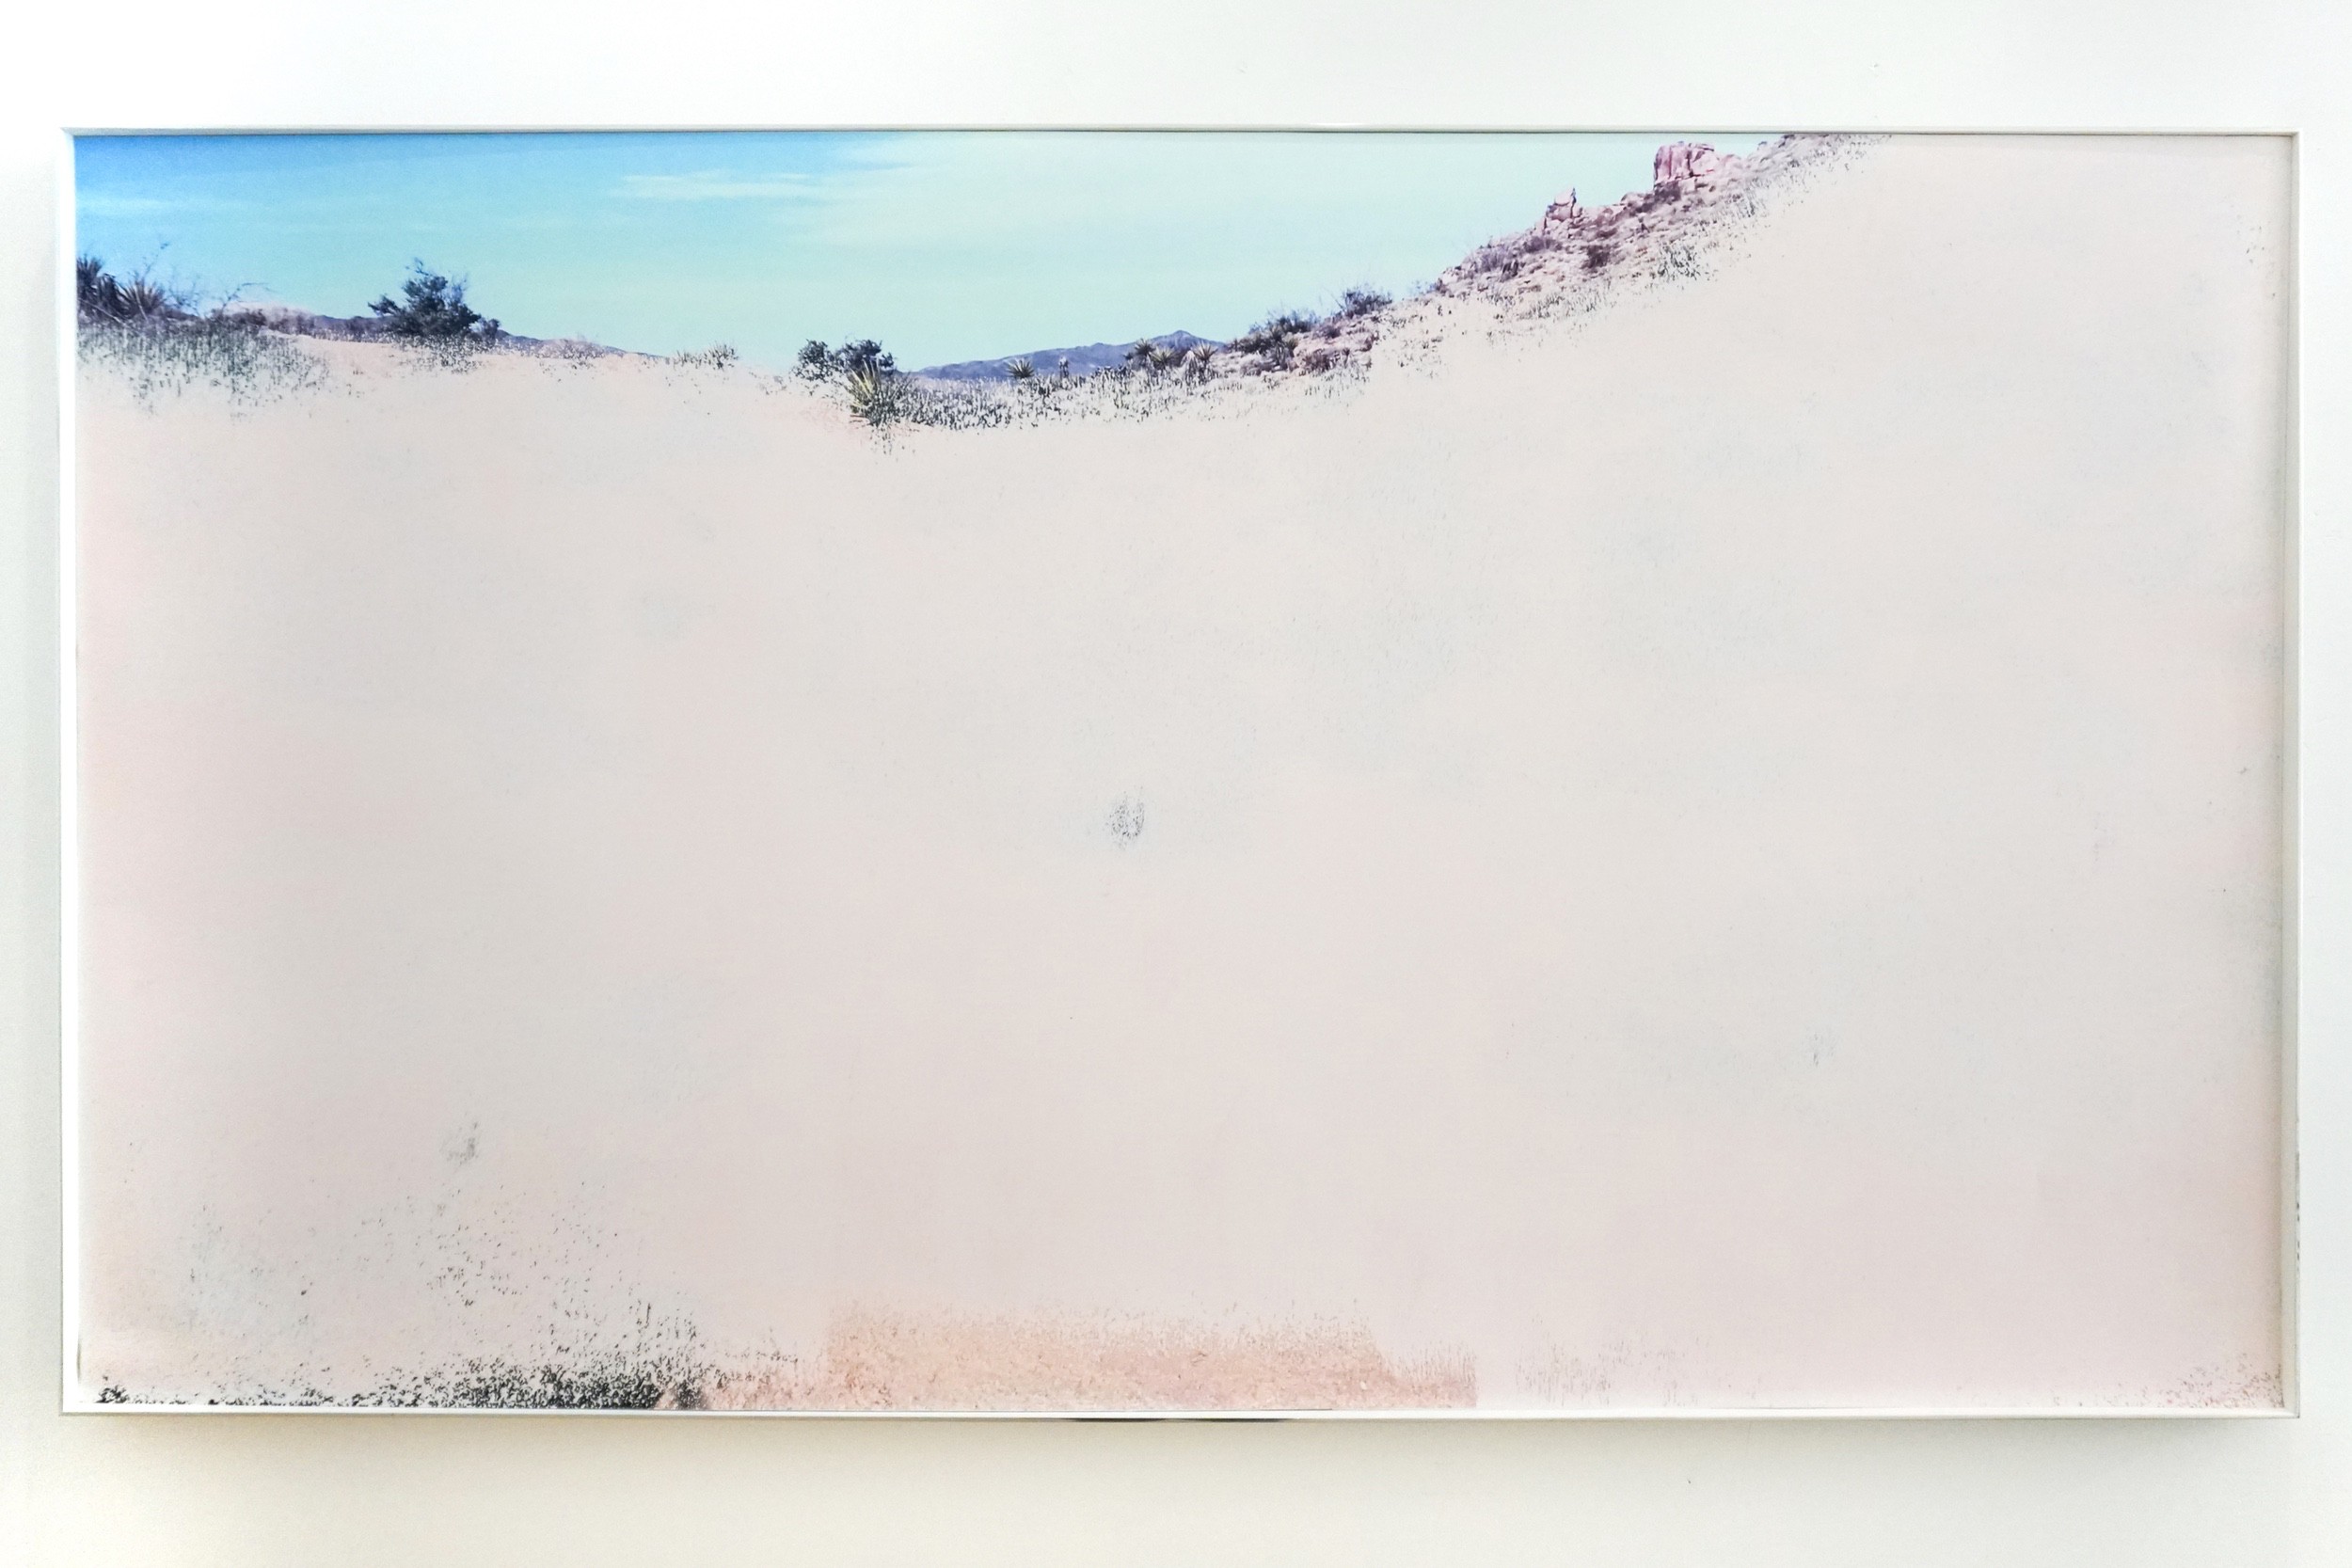  Cybele Lyle  Untitled (Desert Series #4) , 2018 Inkjet print 32.5 x 56.5 inches 